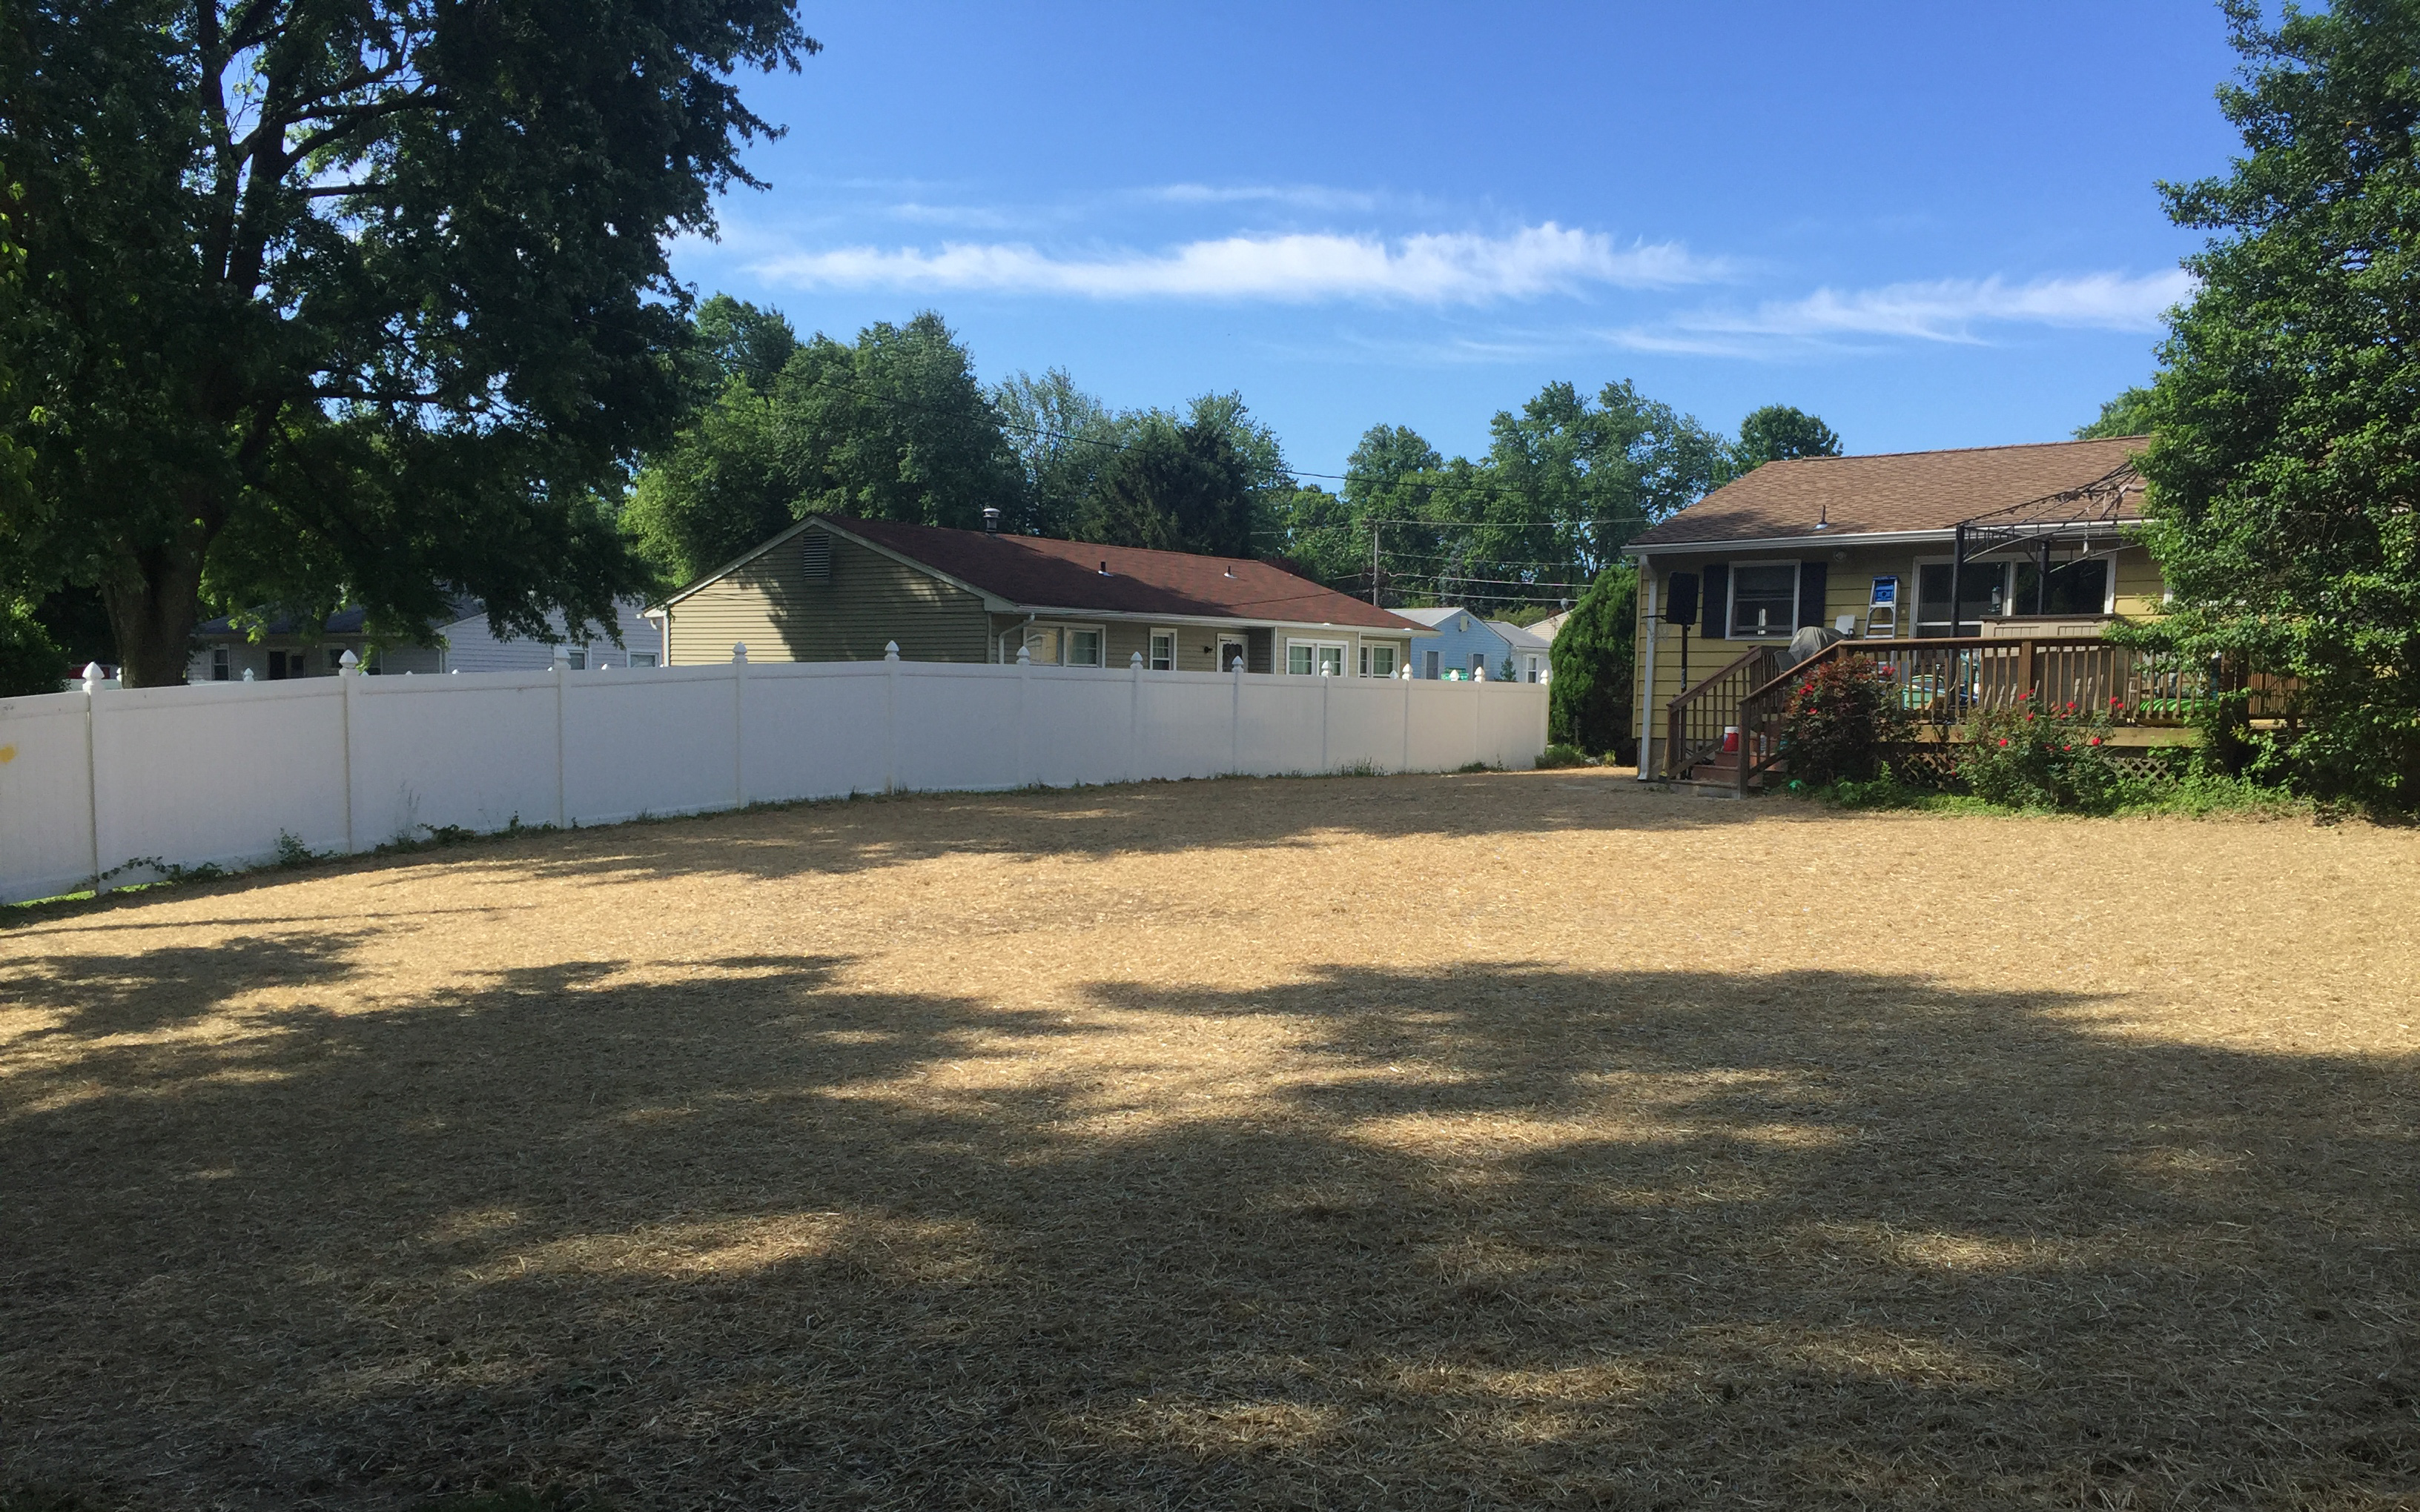 Owings Mills swimming pool removal straw and seed